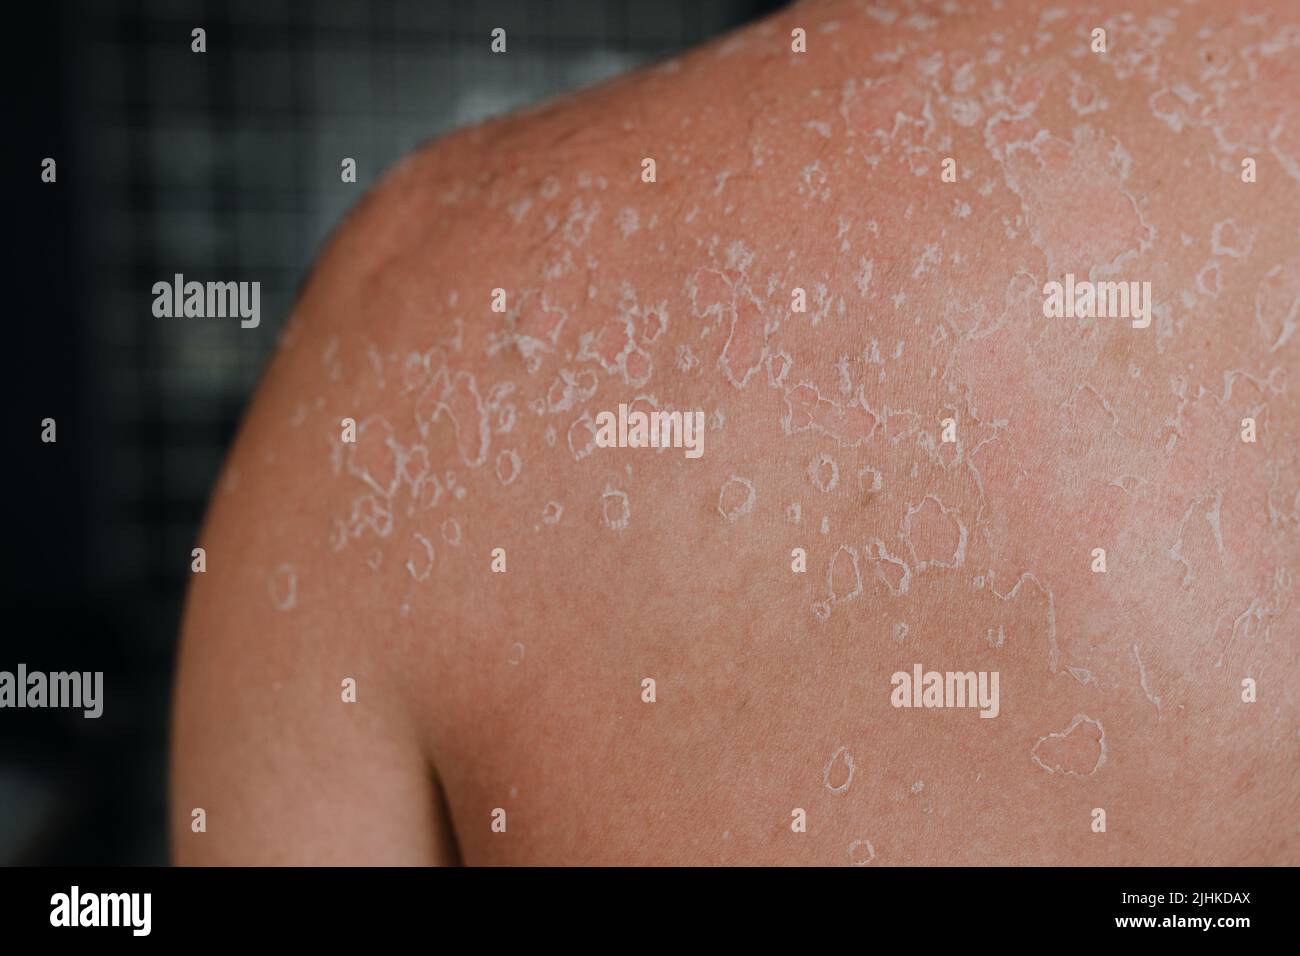 Dermatological conditions of peeling skin on man's back and shoulders, peeling skin and skin care concept. Close up Stock Photo